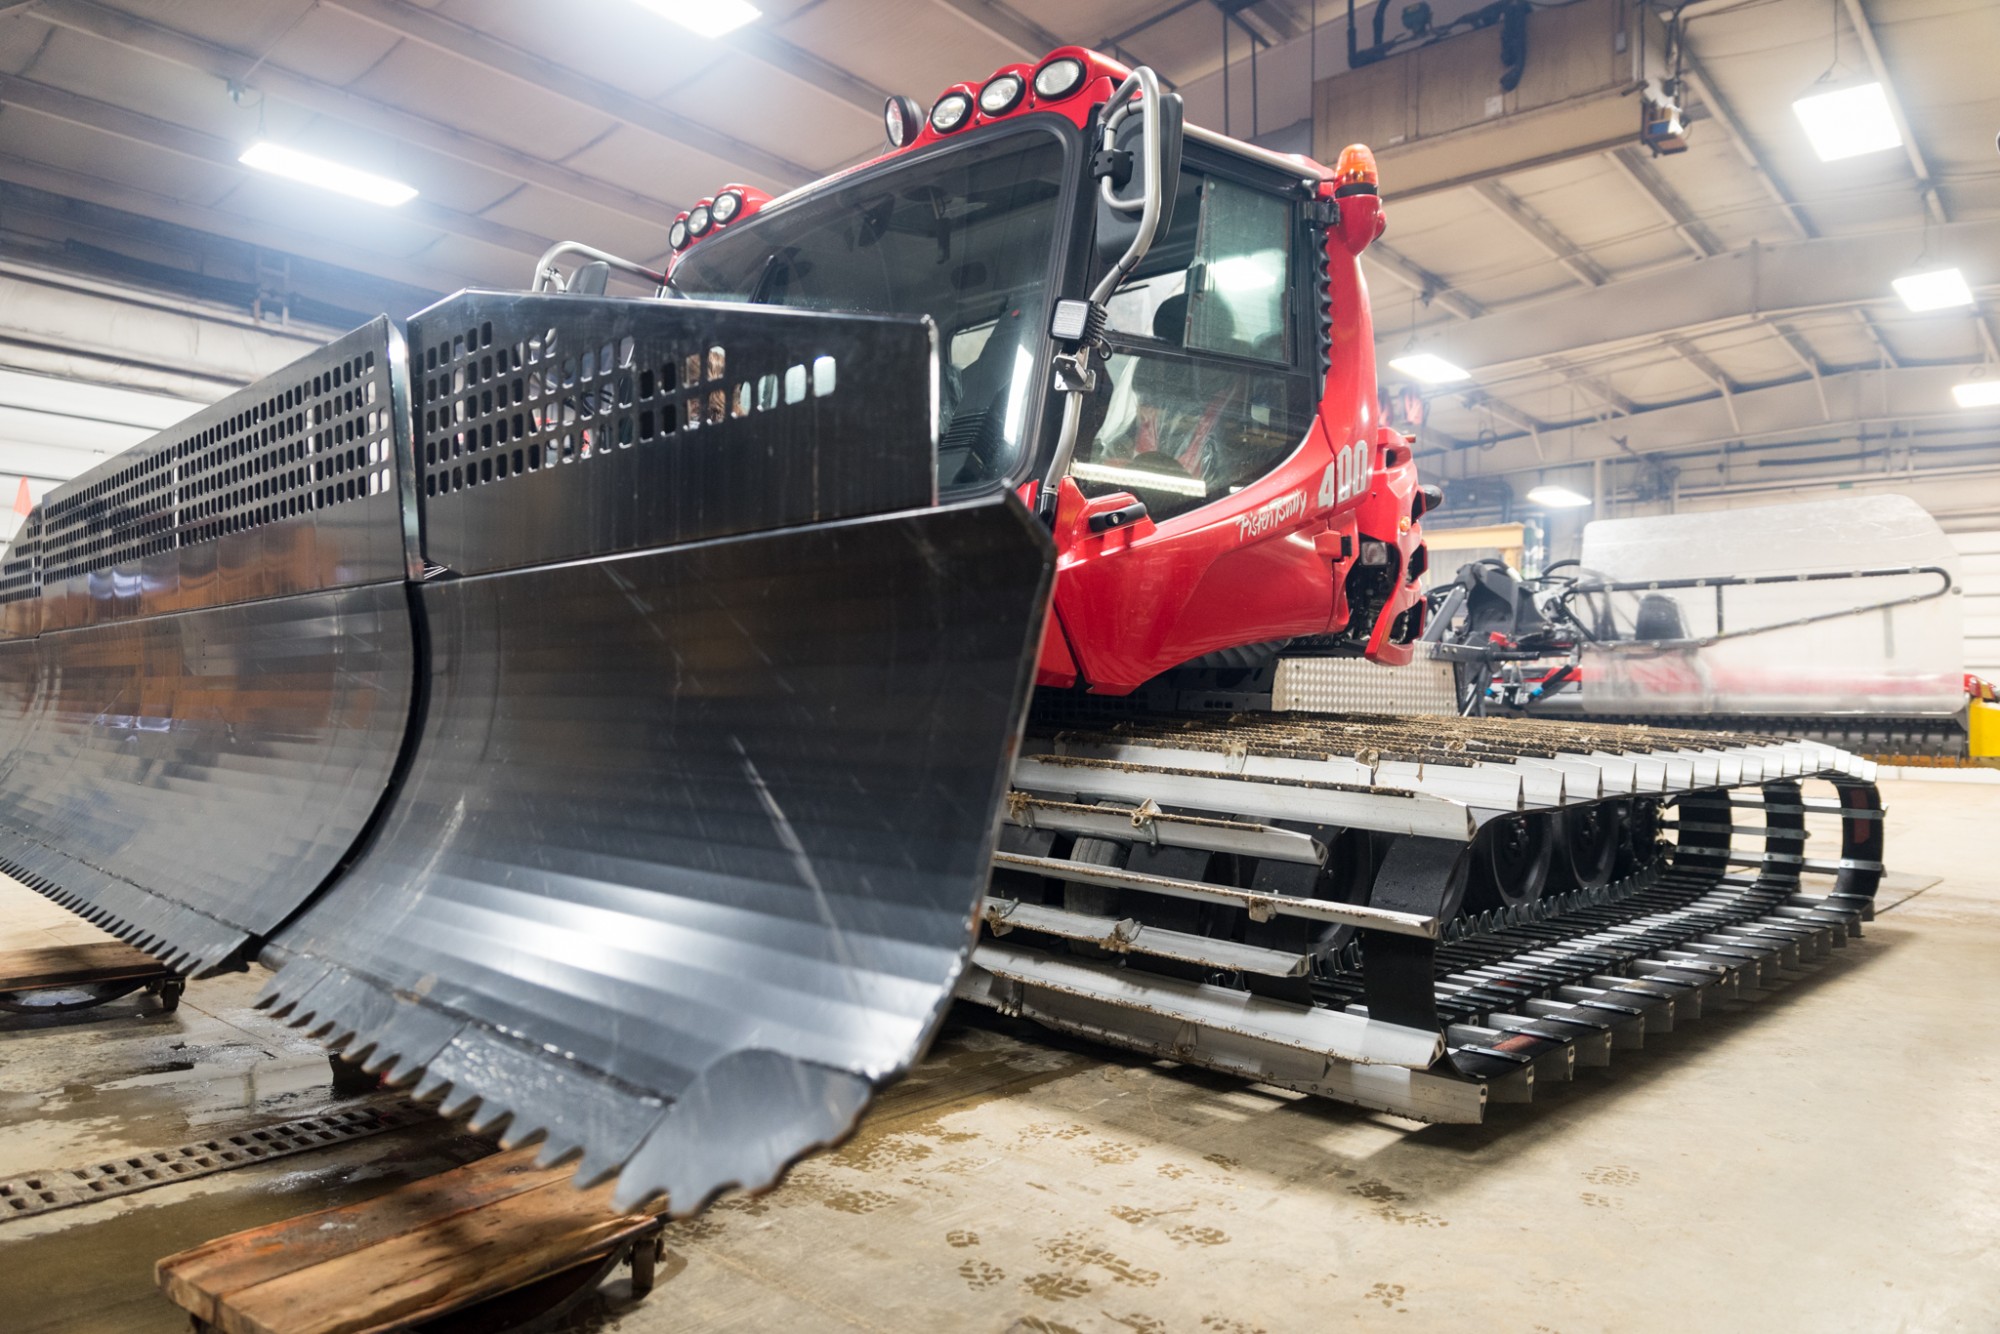 Pisten Bully 400 Snow Cat arrives at Snow Trails in Mansfield, OH